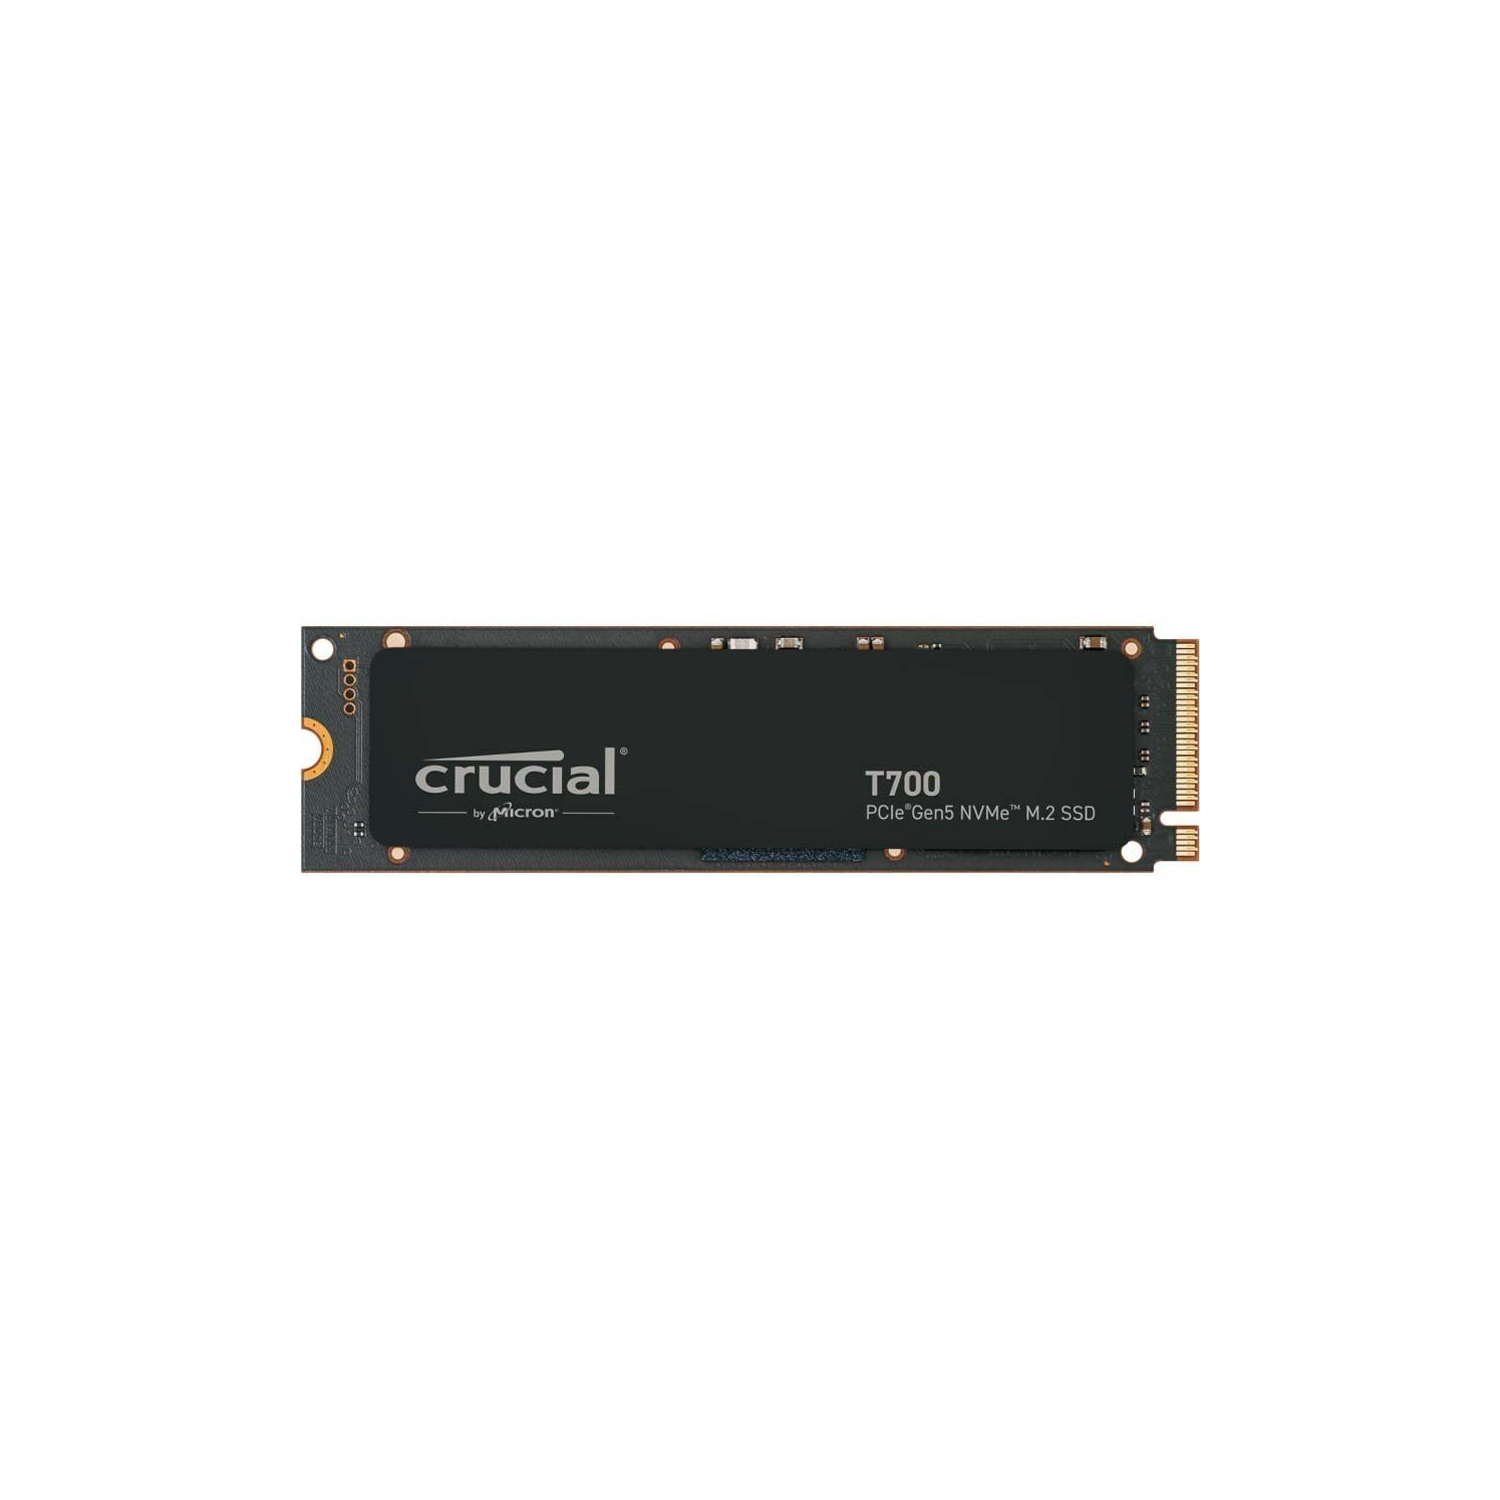 Crucial T700 1TB PCI Express NVMe 5.0 x4 Internal Solid State Drive - (CT1000T700SSD3)